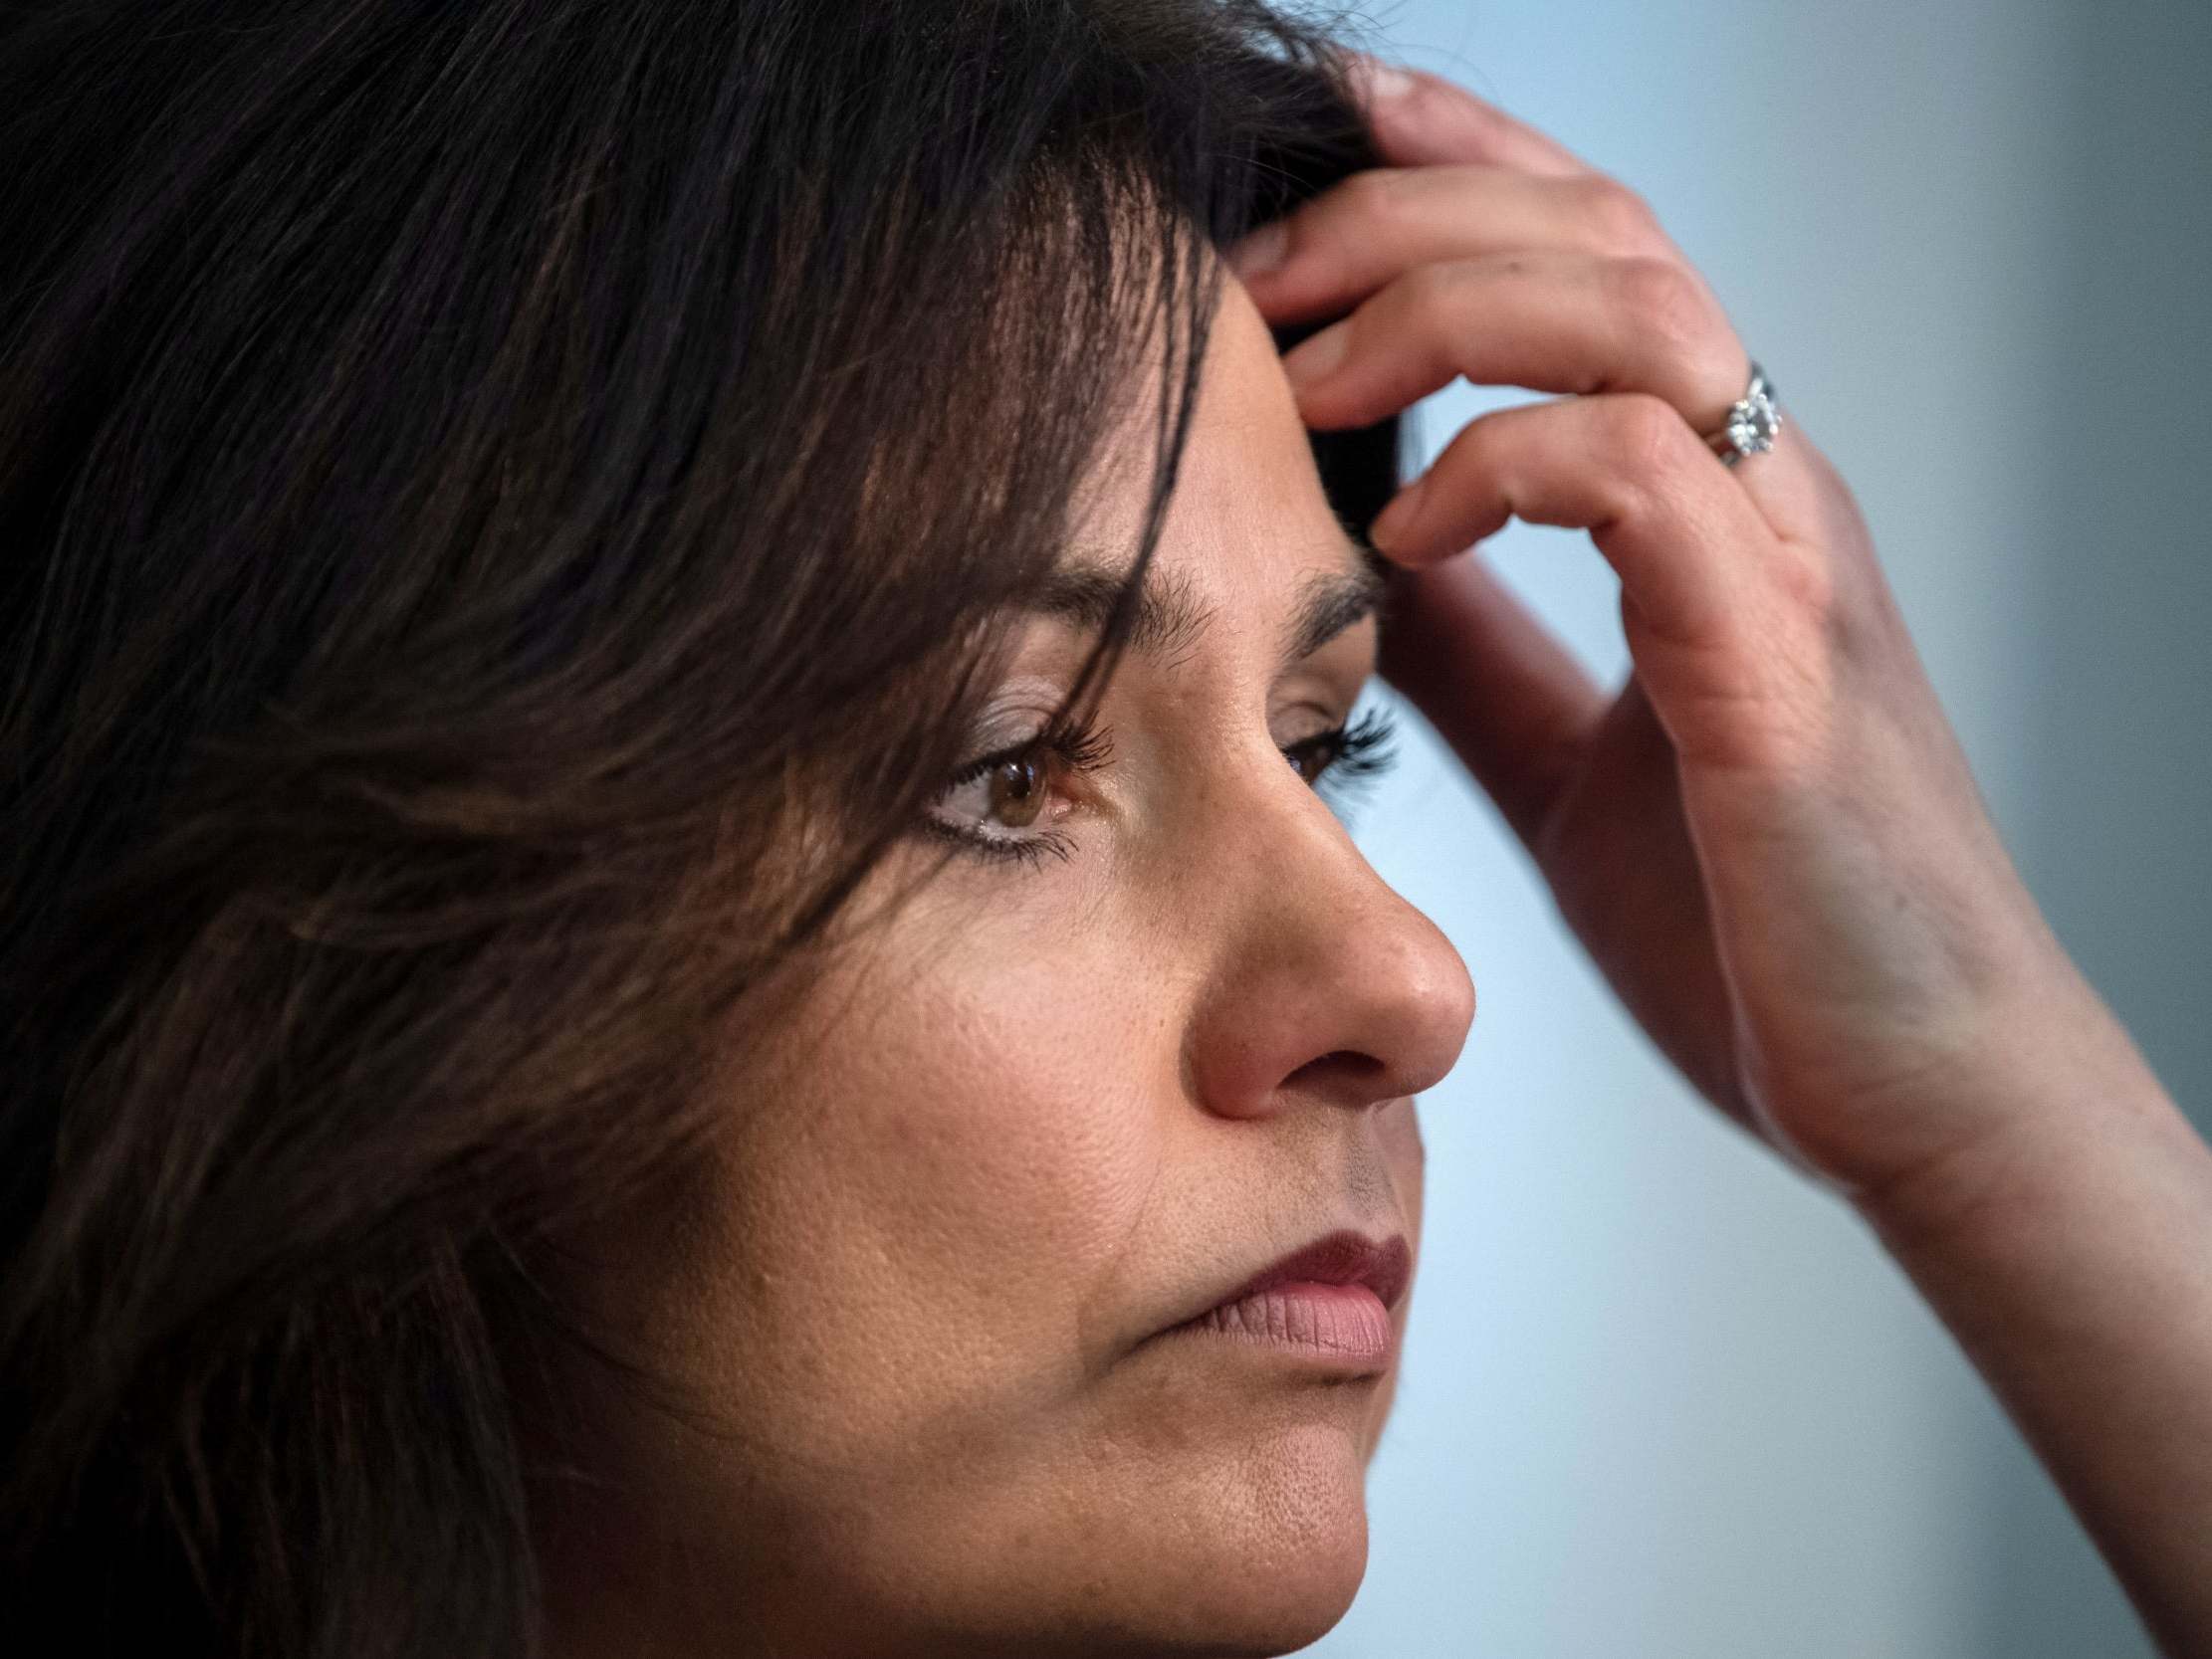 Heidi Allen said she was subjected to ‘dehumanising’ abuse